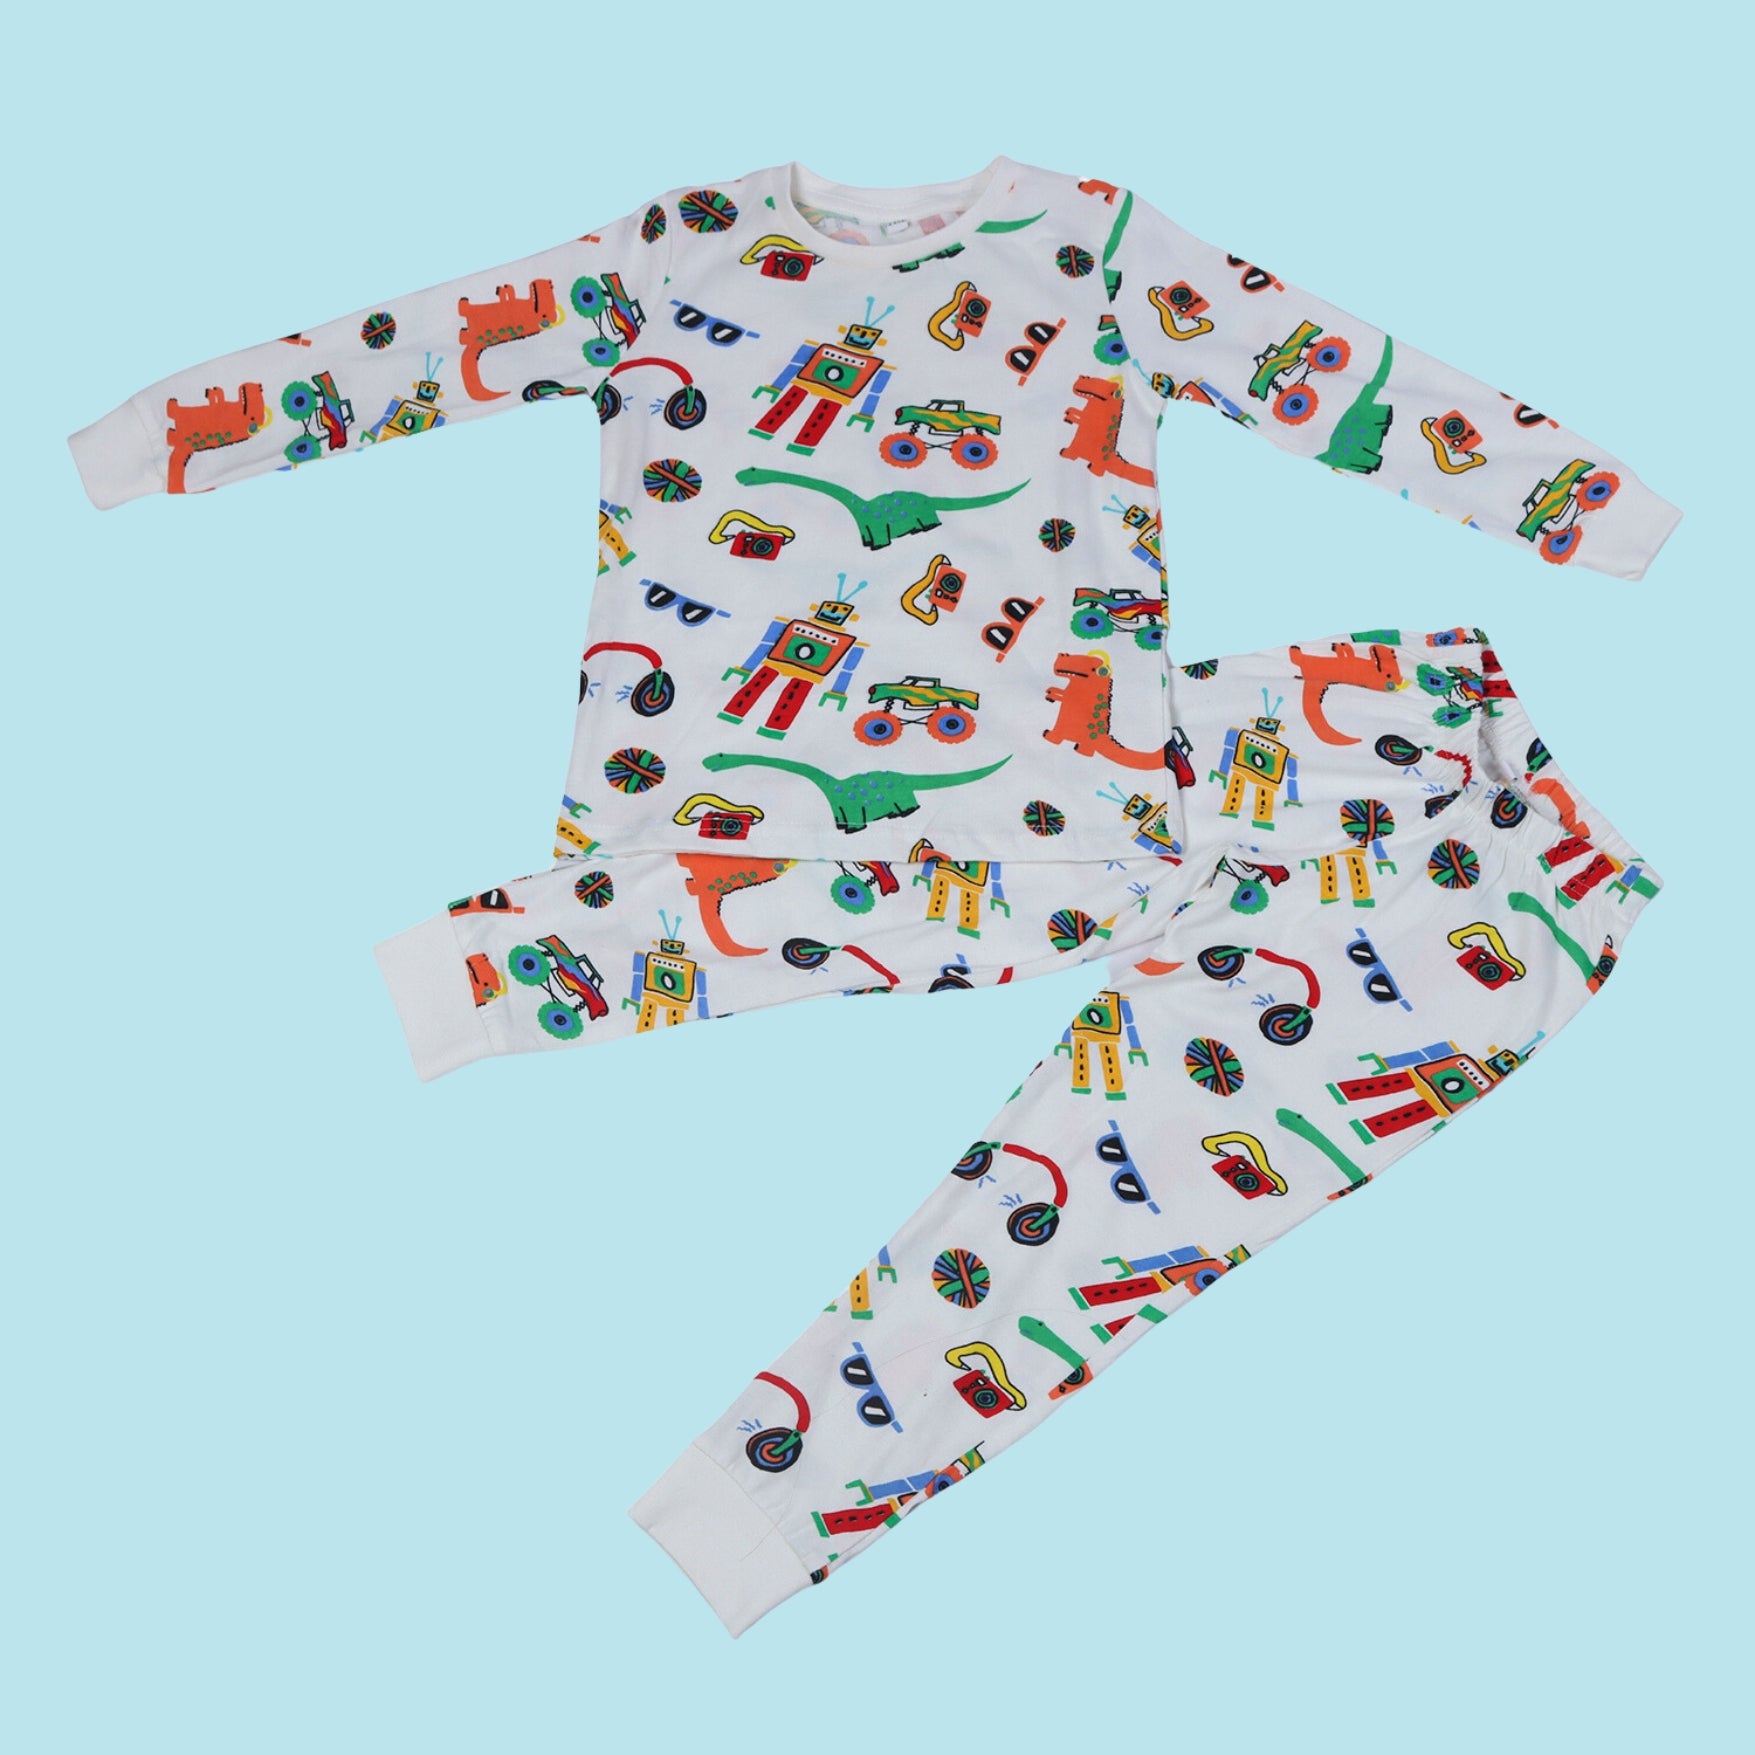 Full Sleeve Night Suit For Boy In White Colour - Robots & Toys